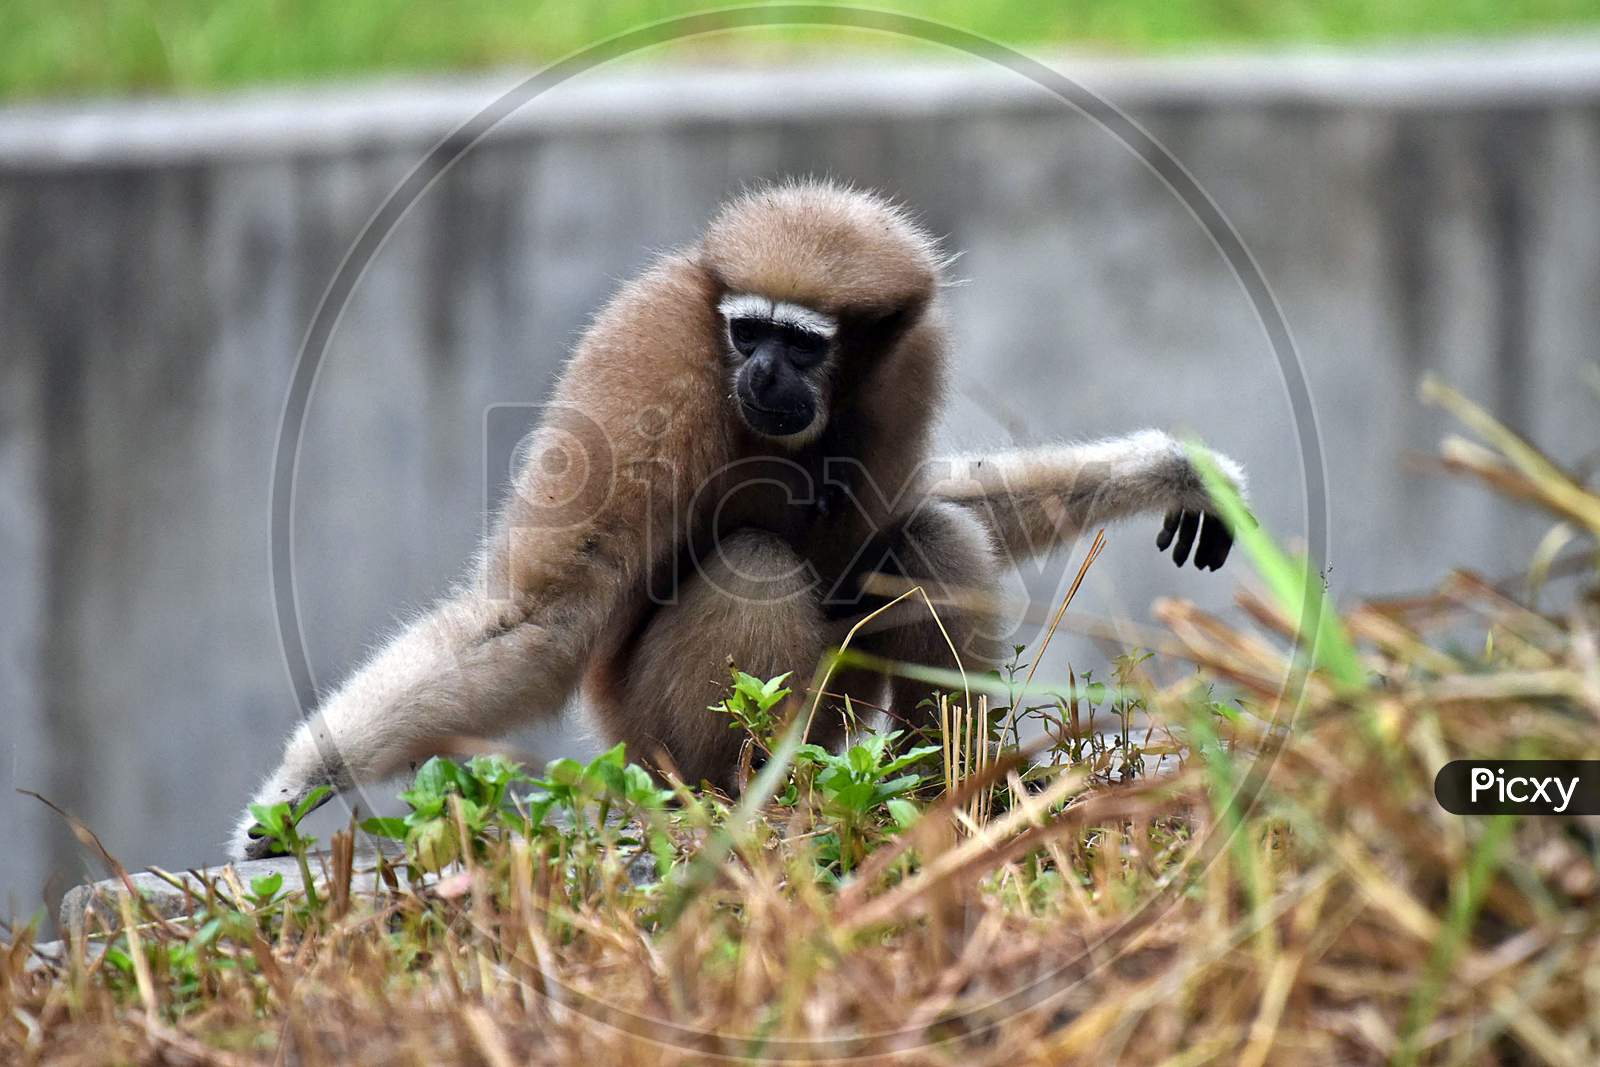 A Hoolock Gibbon pictured inside The Enclosure At The Assam State Zoo Cum Botanical Garden In Guwahati